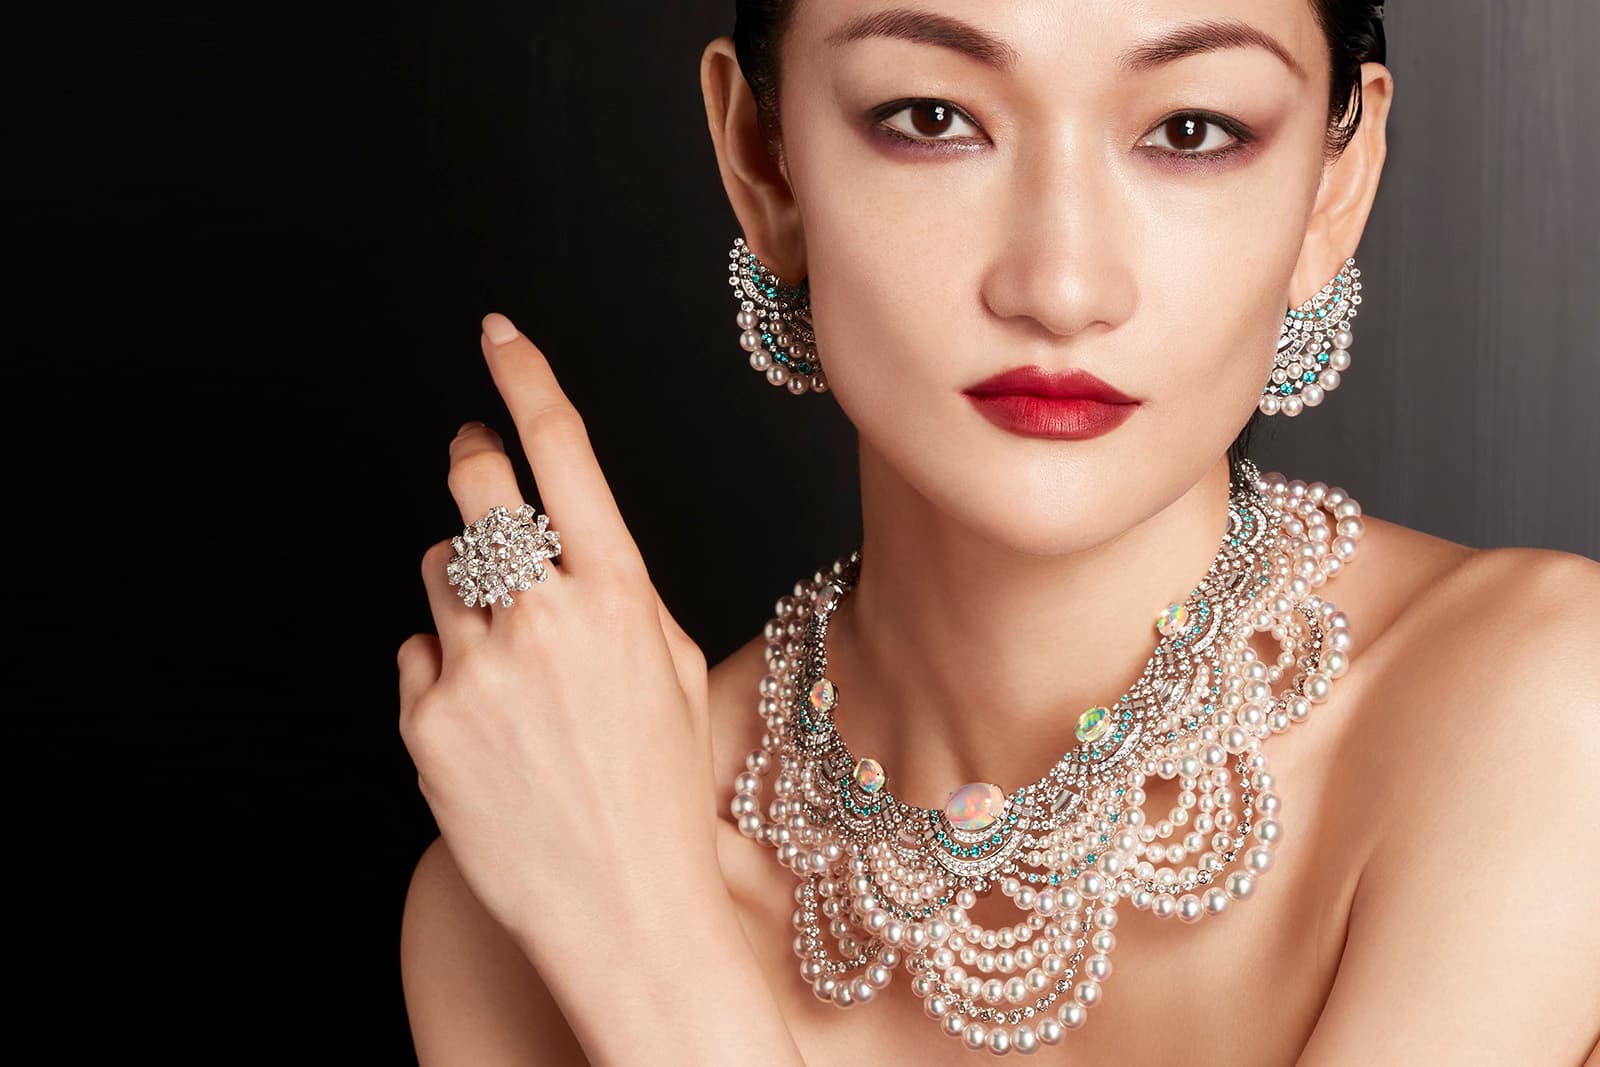 Mikimoto ‘The Japanese Sense of Beauty’ High Jewellery necklace with opals, tourmalines and Akoya cultured pearls 